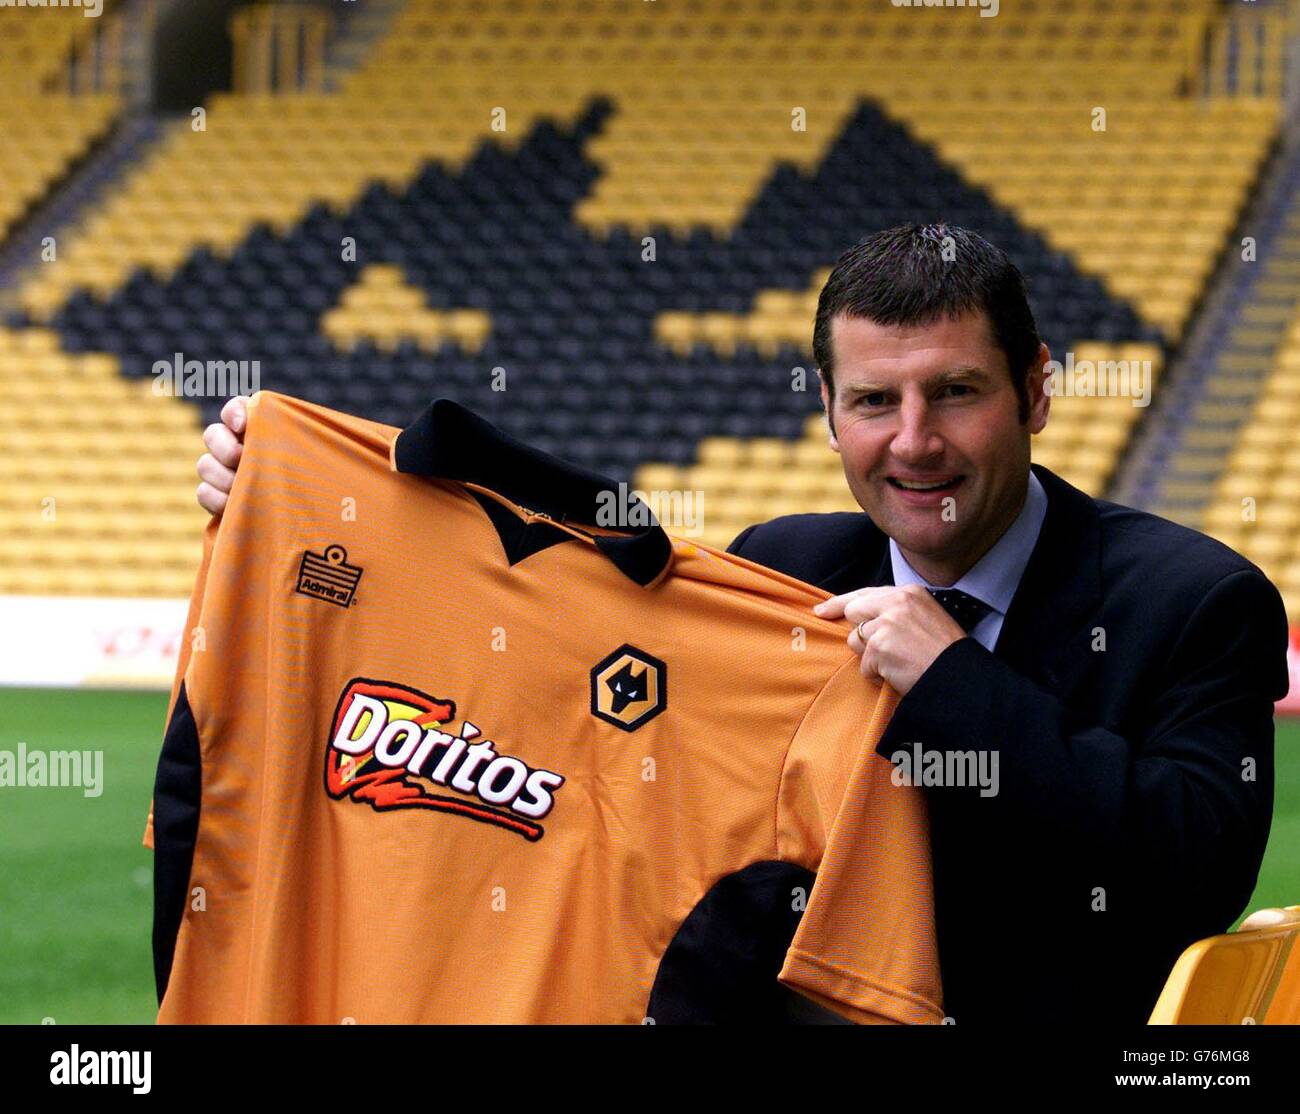 Denis Irwin holds his new Wolverhampton Wanderers shirt, at the Molineux Stadium, Wolverhampton, after the former Manchester United defender's free transfer. . Stock Photo